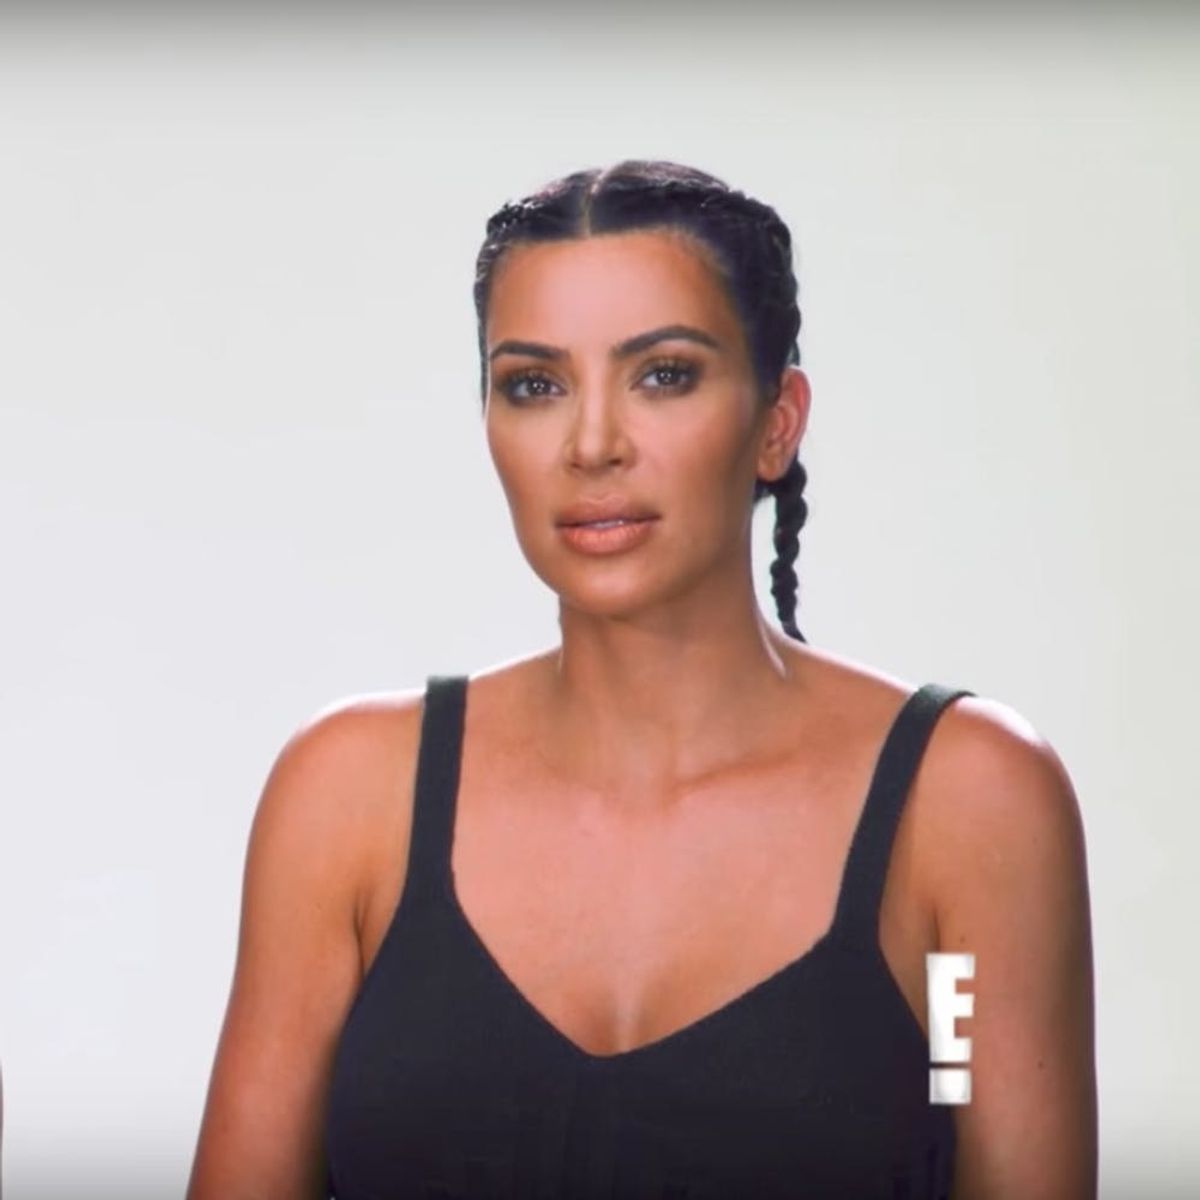 Kim Kardashian West Calls Caitlyn Jenner a “Liar” and “Not a Good Person” on “KUWTK”